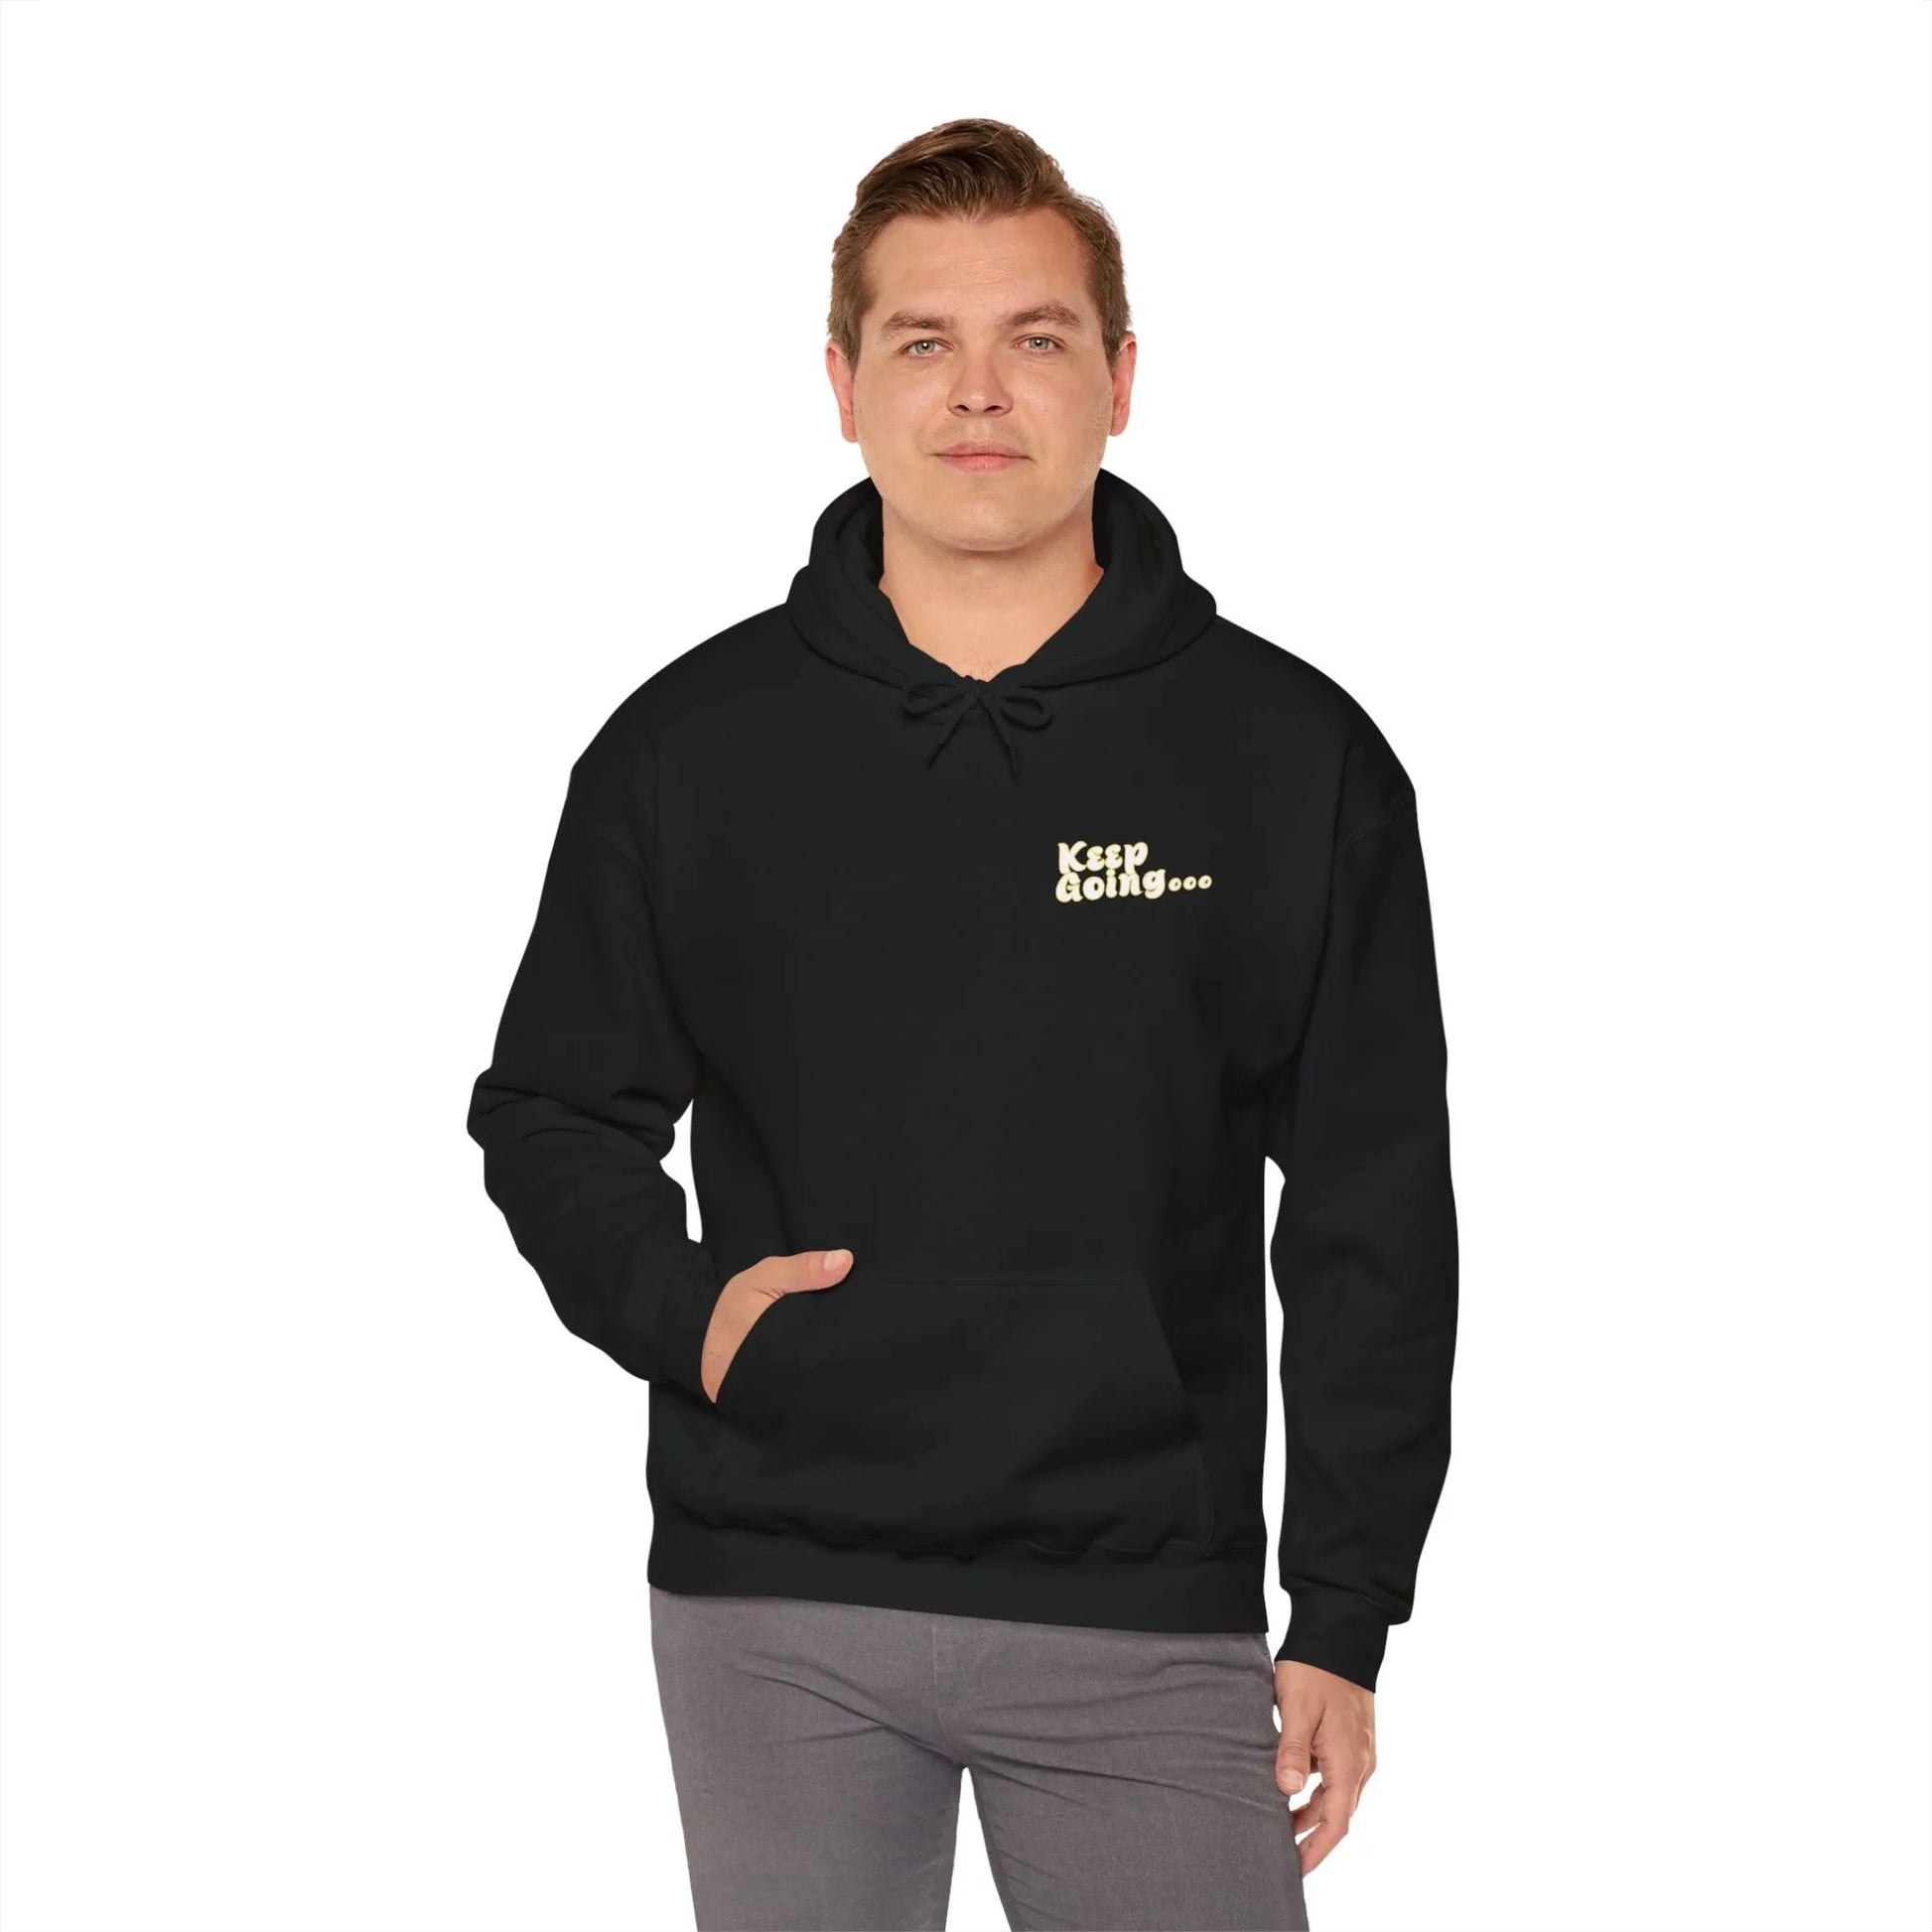 It's A Good Day To Keep Going Hoodie Yellow Model Front